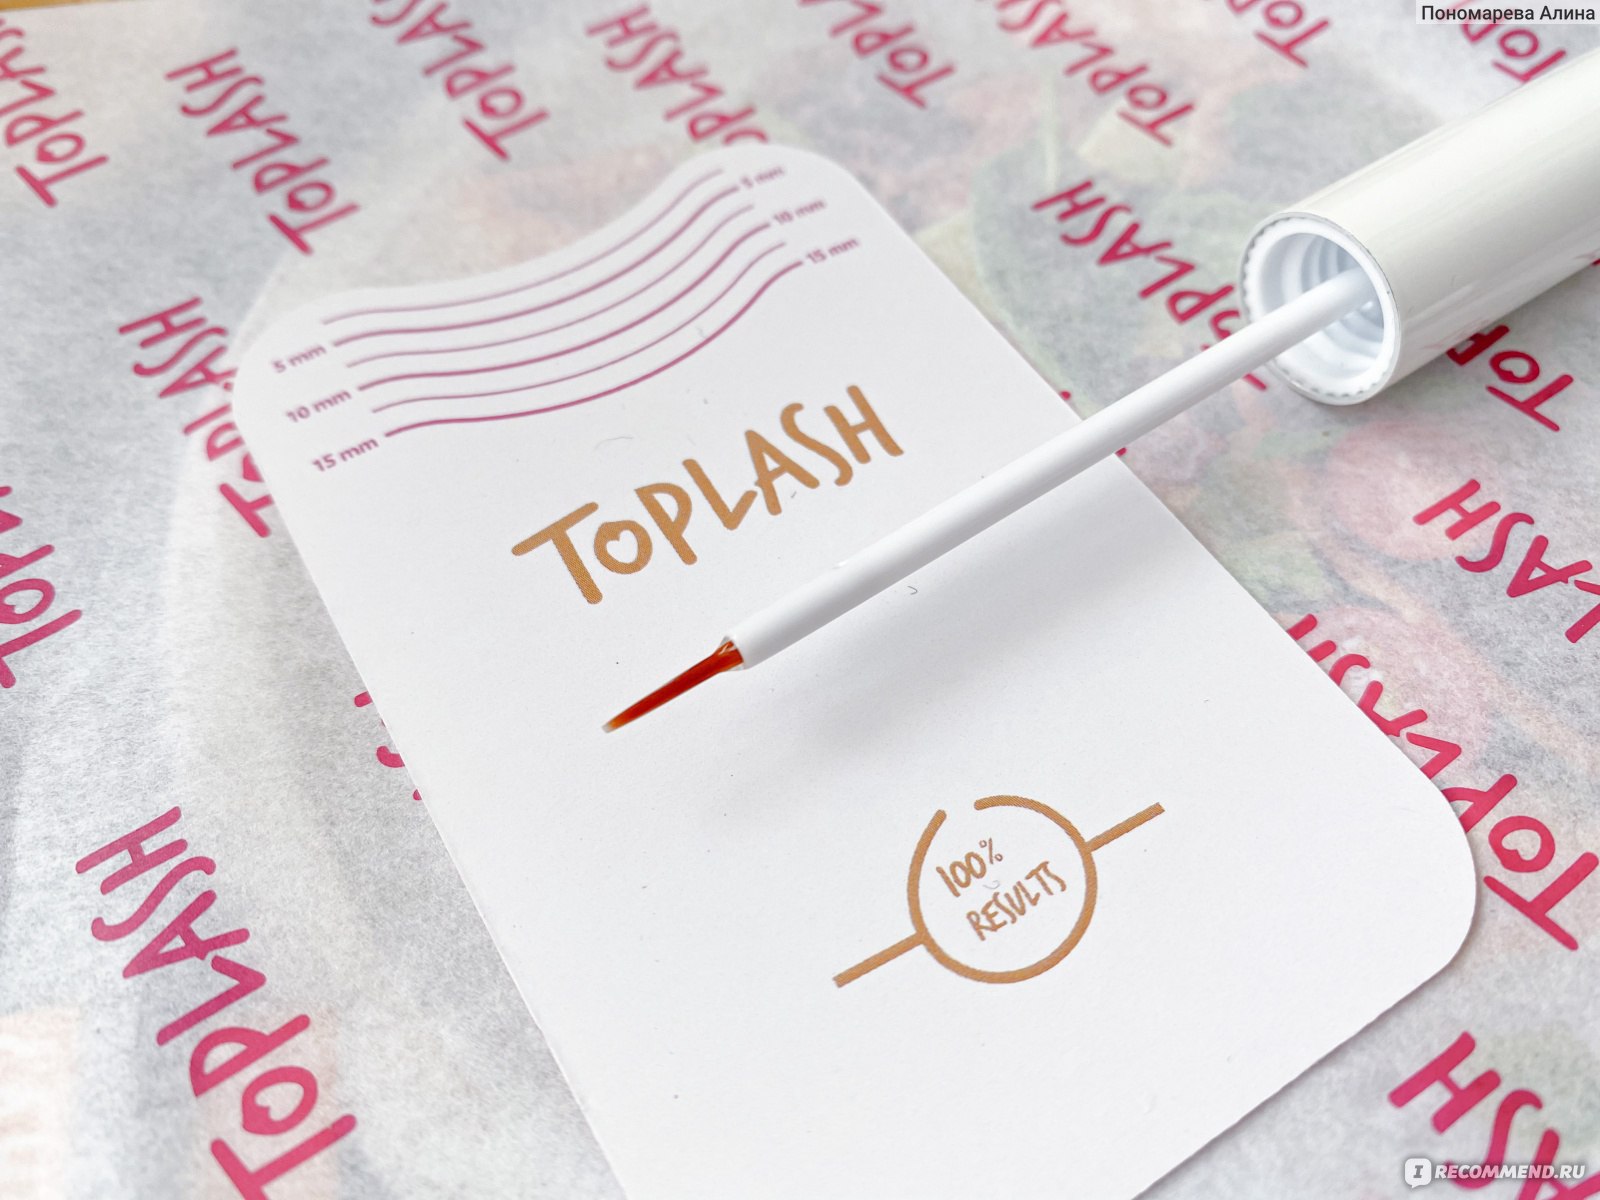 Toplash and brow booster